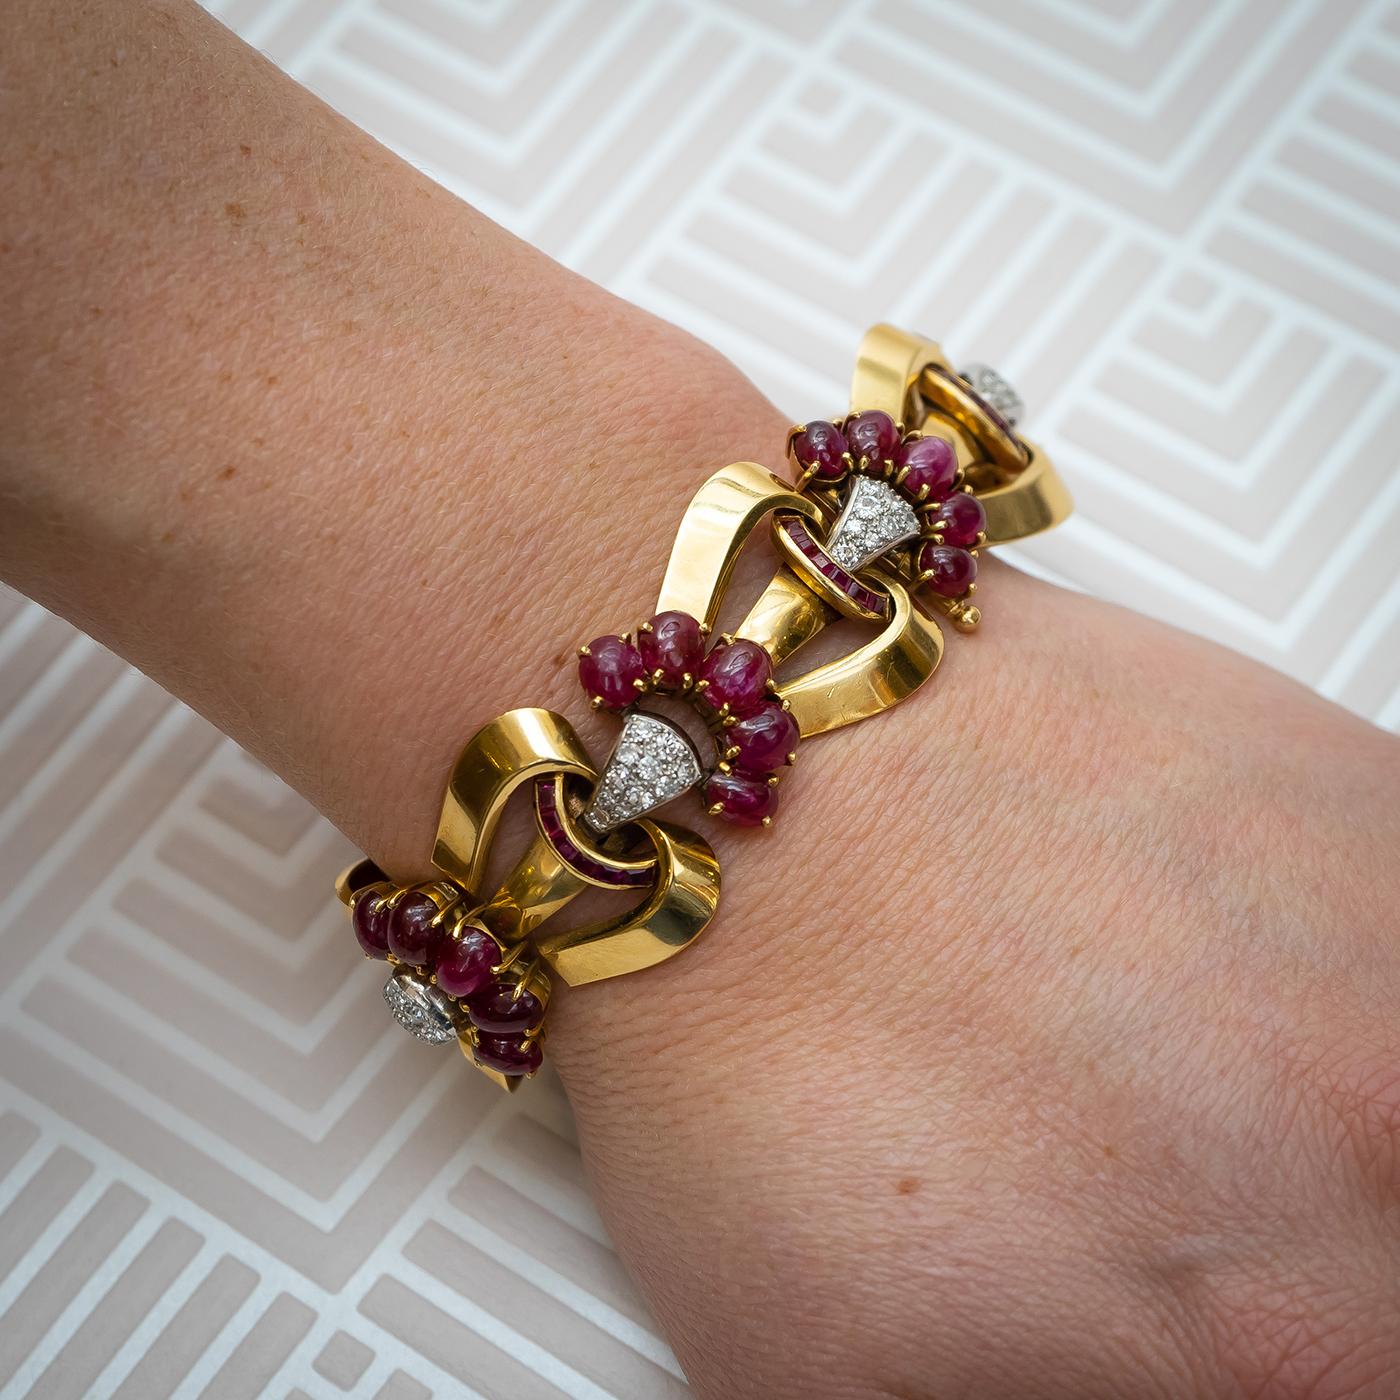 A French, vintage, ruby, diamond and gold bracelet, with six sets of pavé set round brilliant-cut diamonds, topped with five graduating cabochon rubies, with square, calibré-cut, channel set ruby curved bands, below the diamonds, alternating with